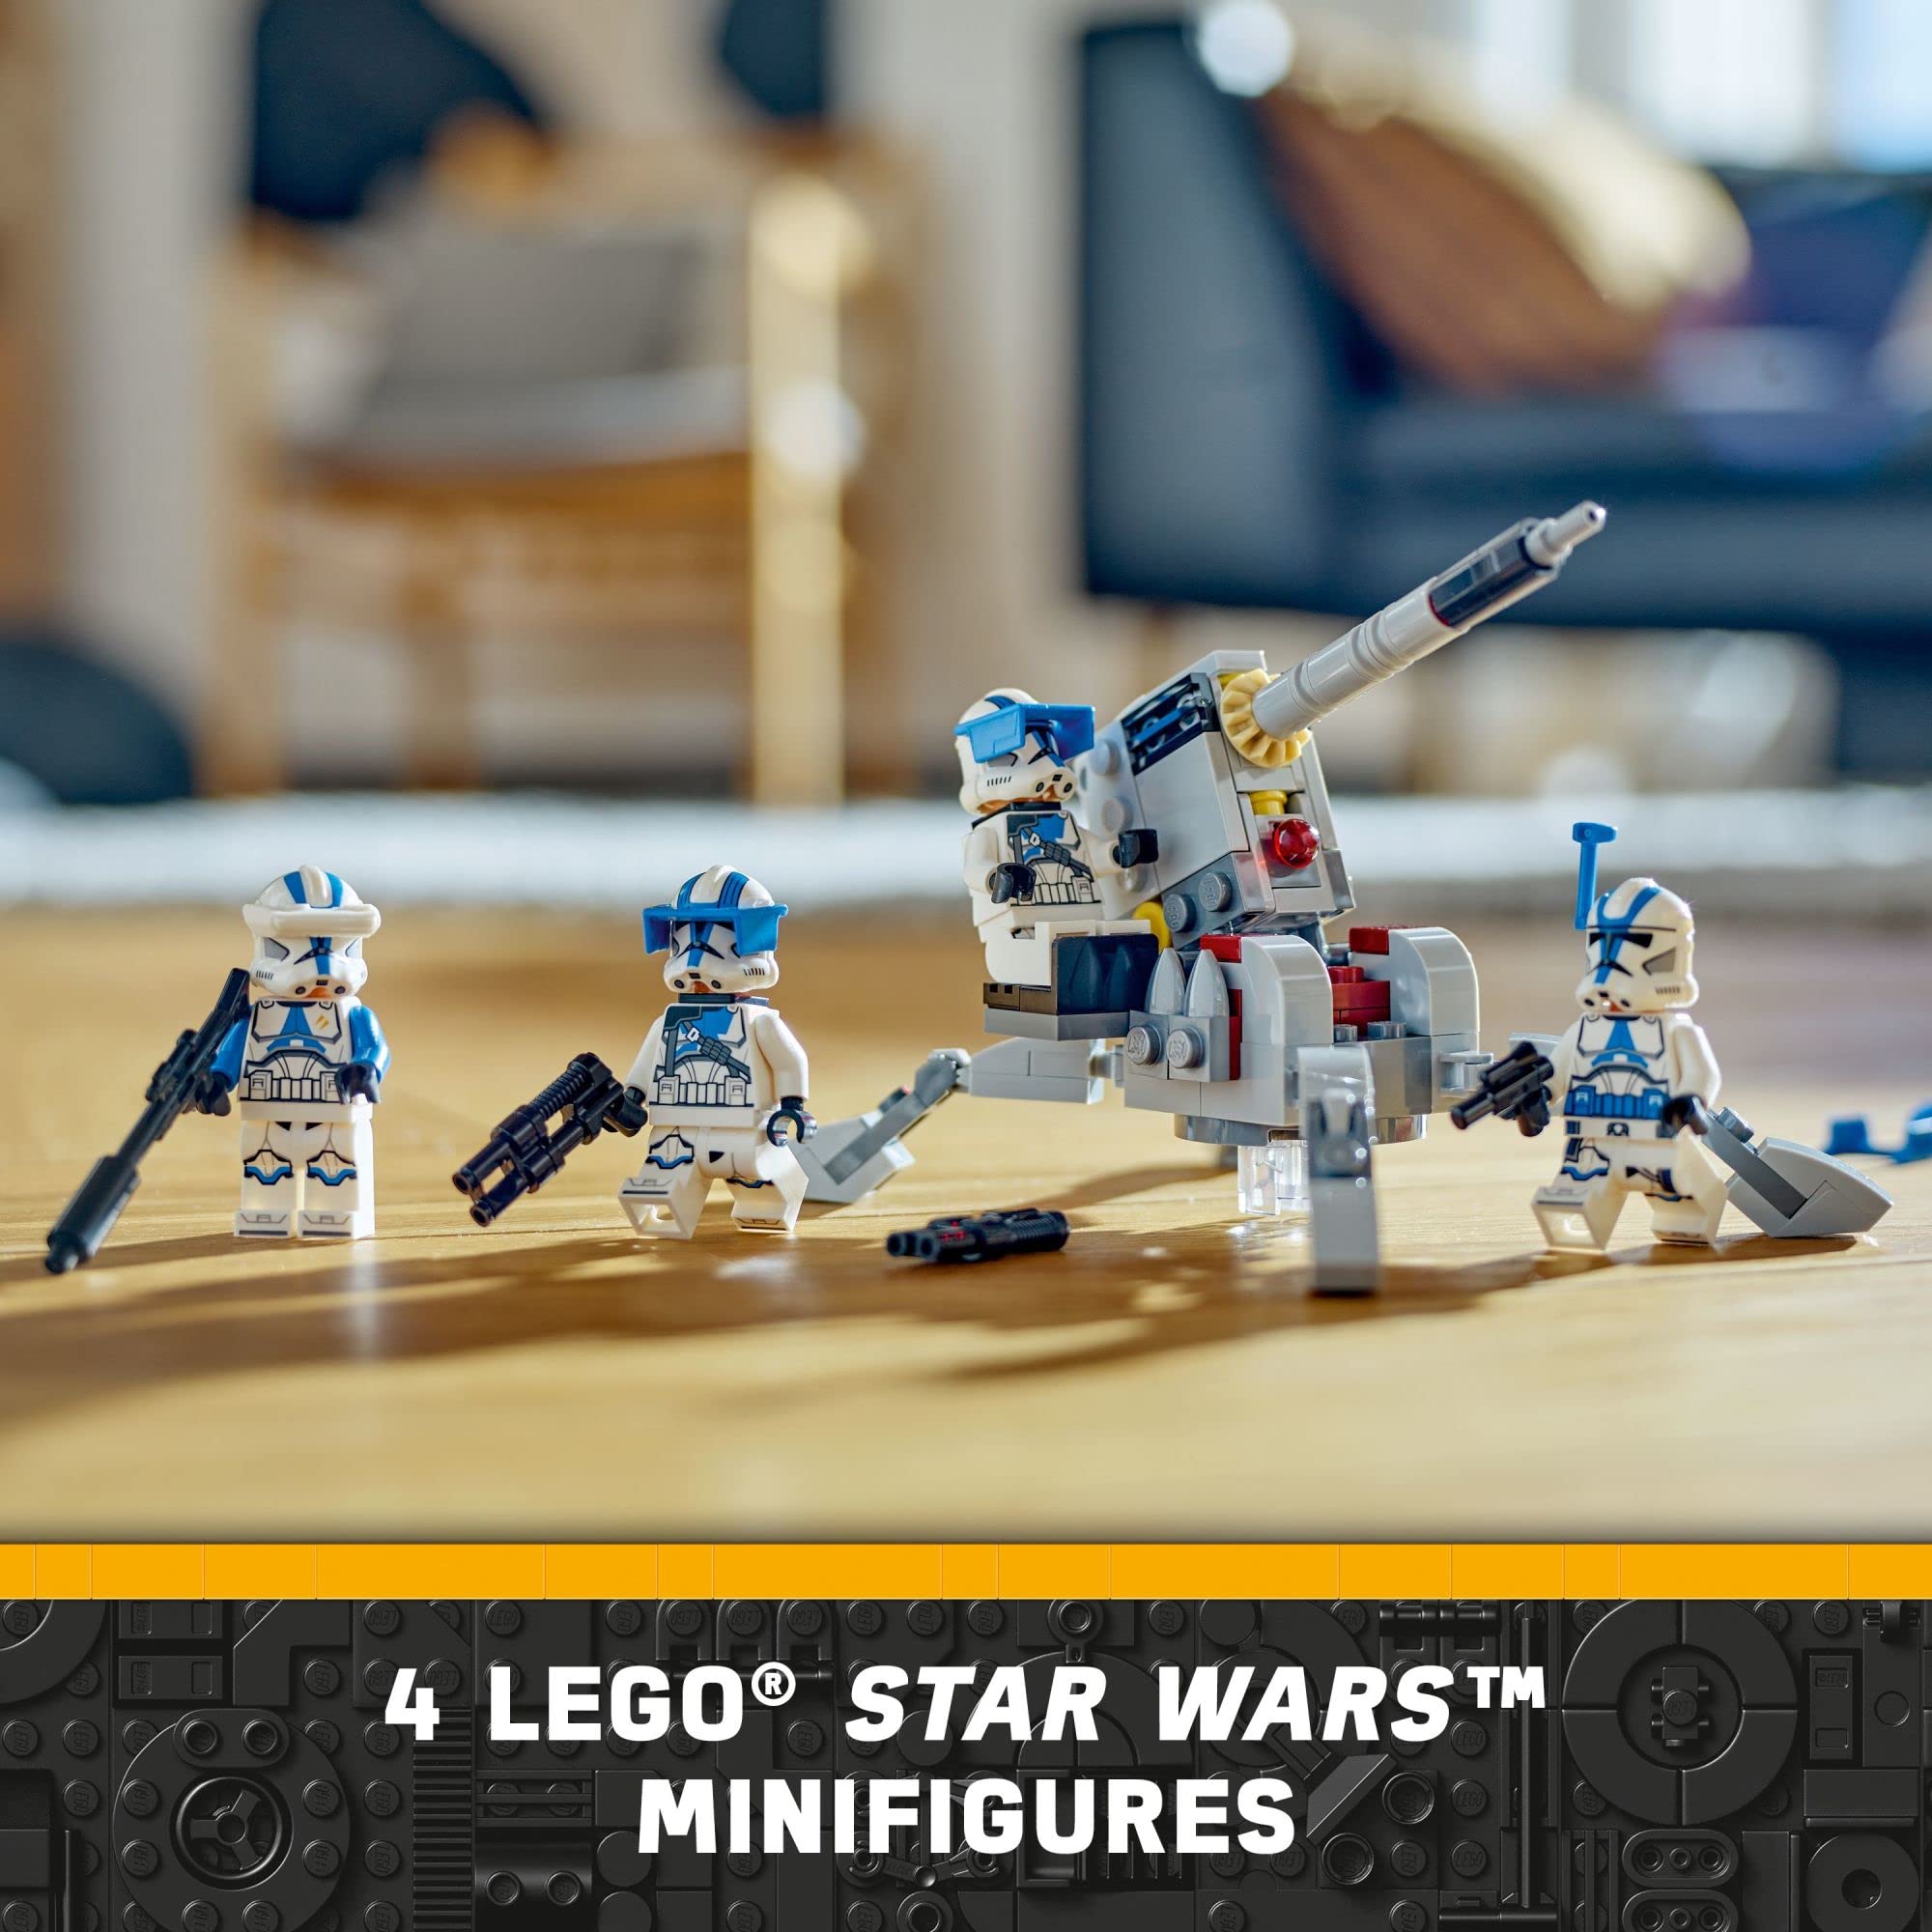 LEGO Star Wars 501st Clone Troopers Battle Pack 75345 Toy Set - Buildable AV-7 Anti Vehicle Cannon, 4 Minifigures, Clone Squadron Collection, Portable Travel Toy, Great Birthday Gift for Kids Ages 6+